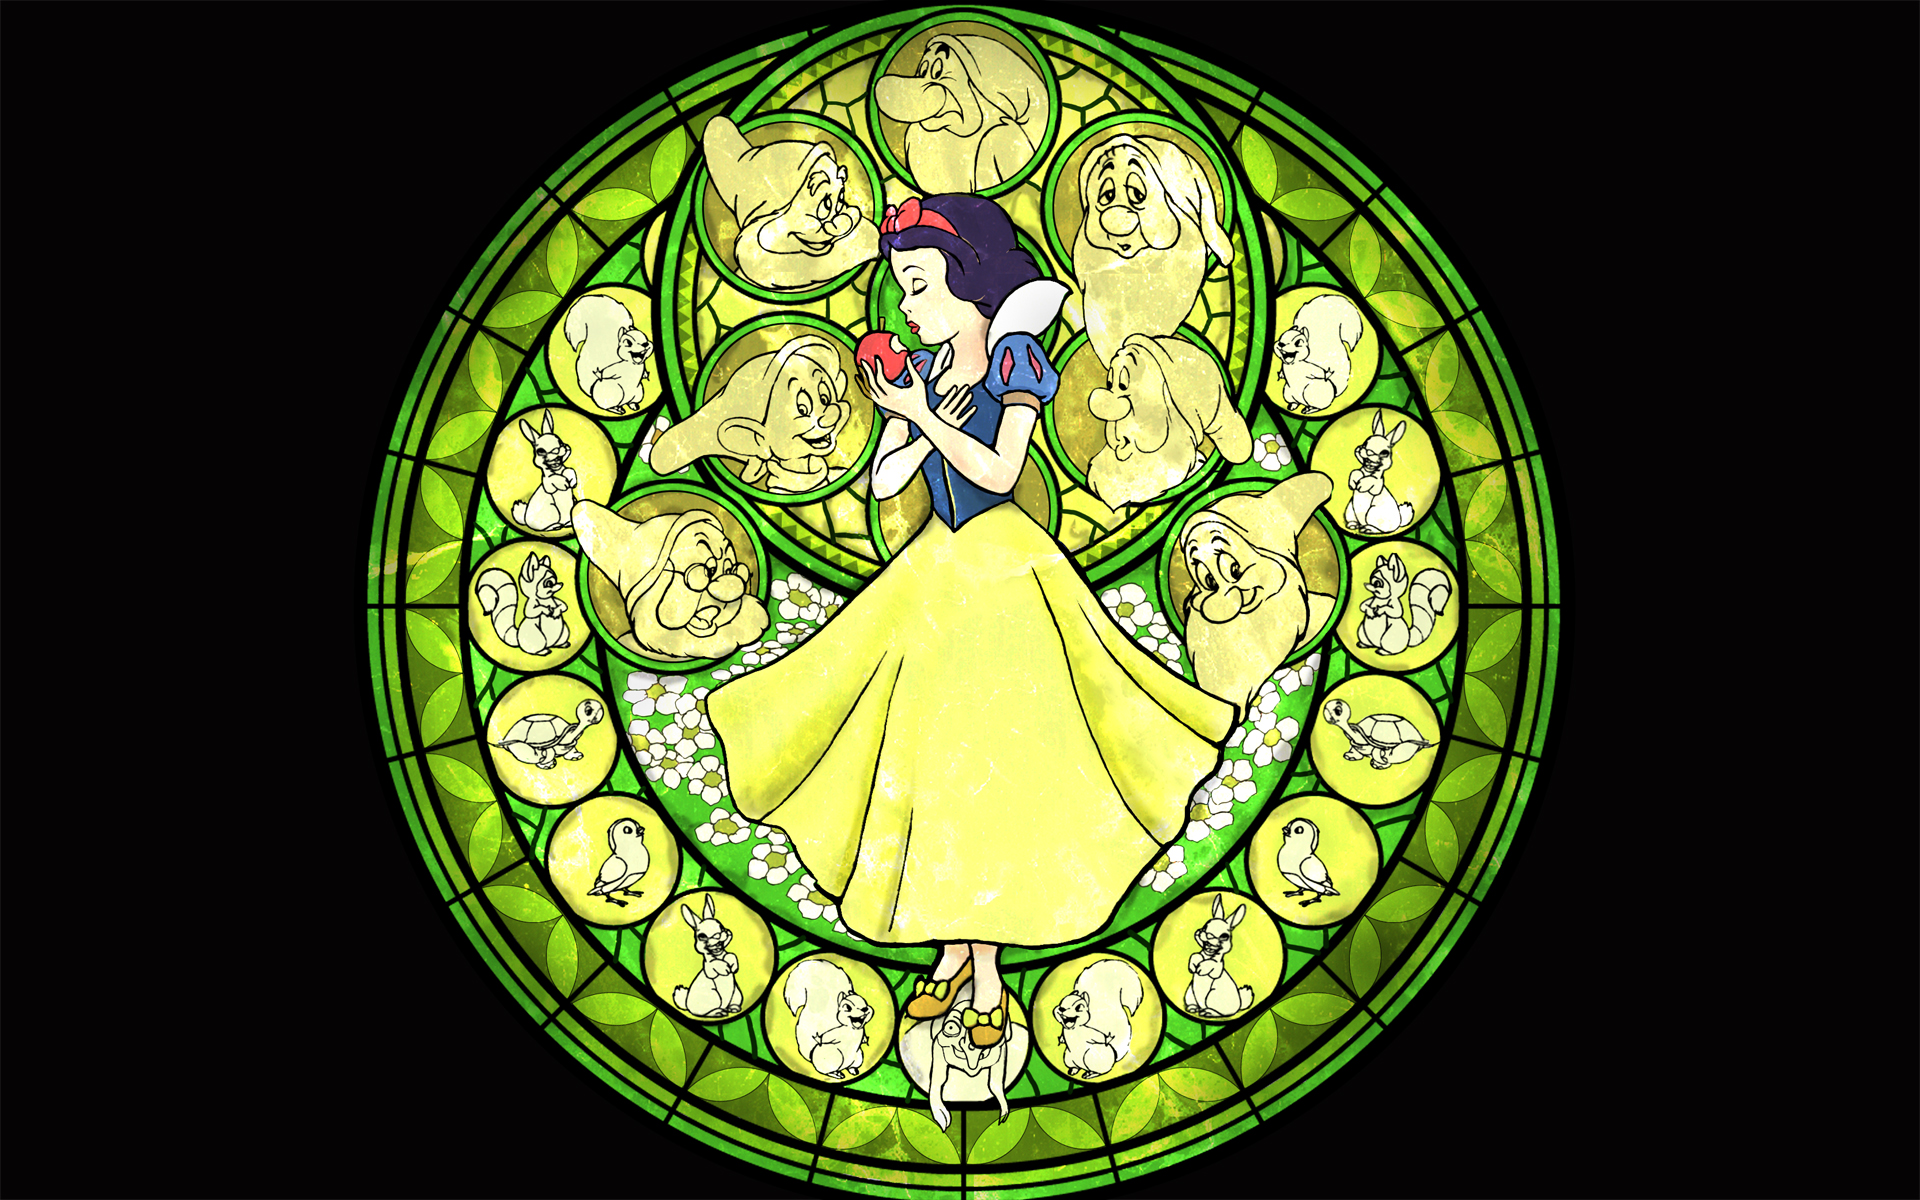 Kingdom Hearts, Snow White, stained glass - desktop wallpaper